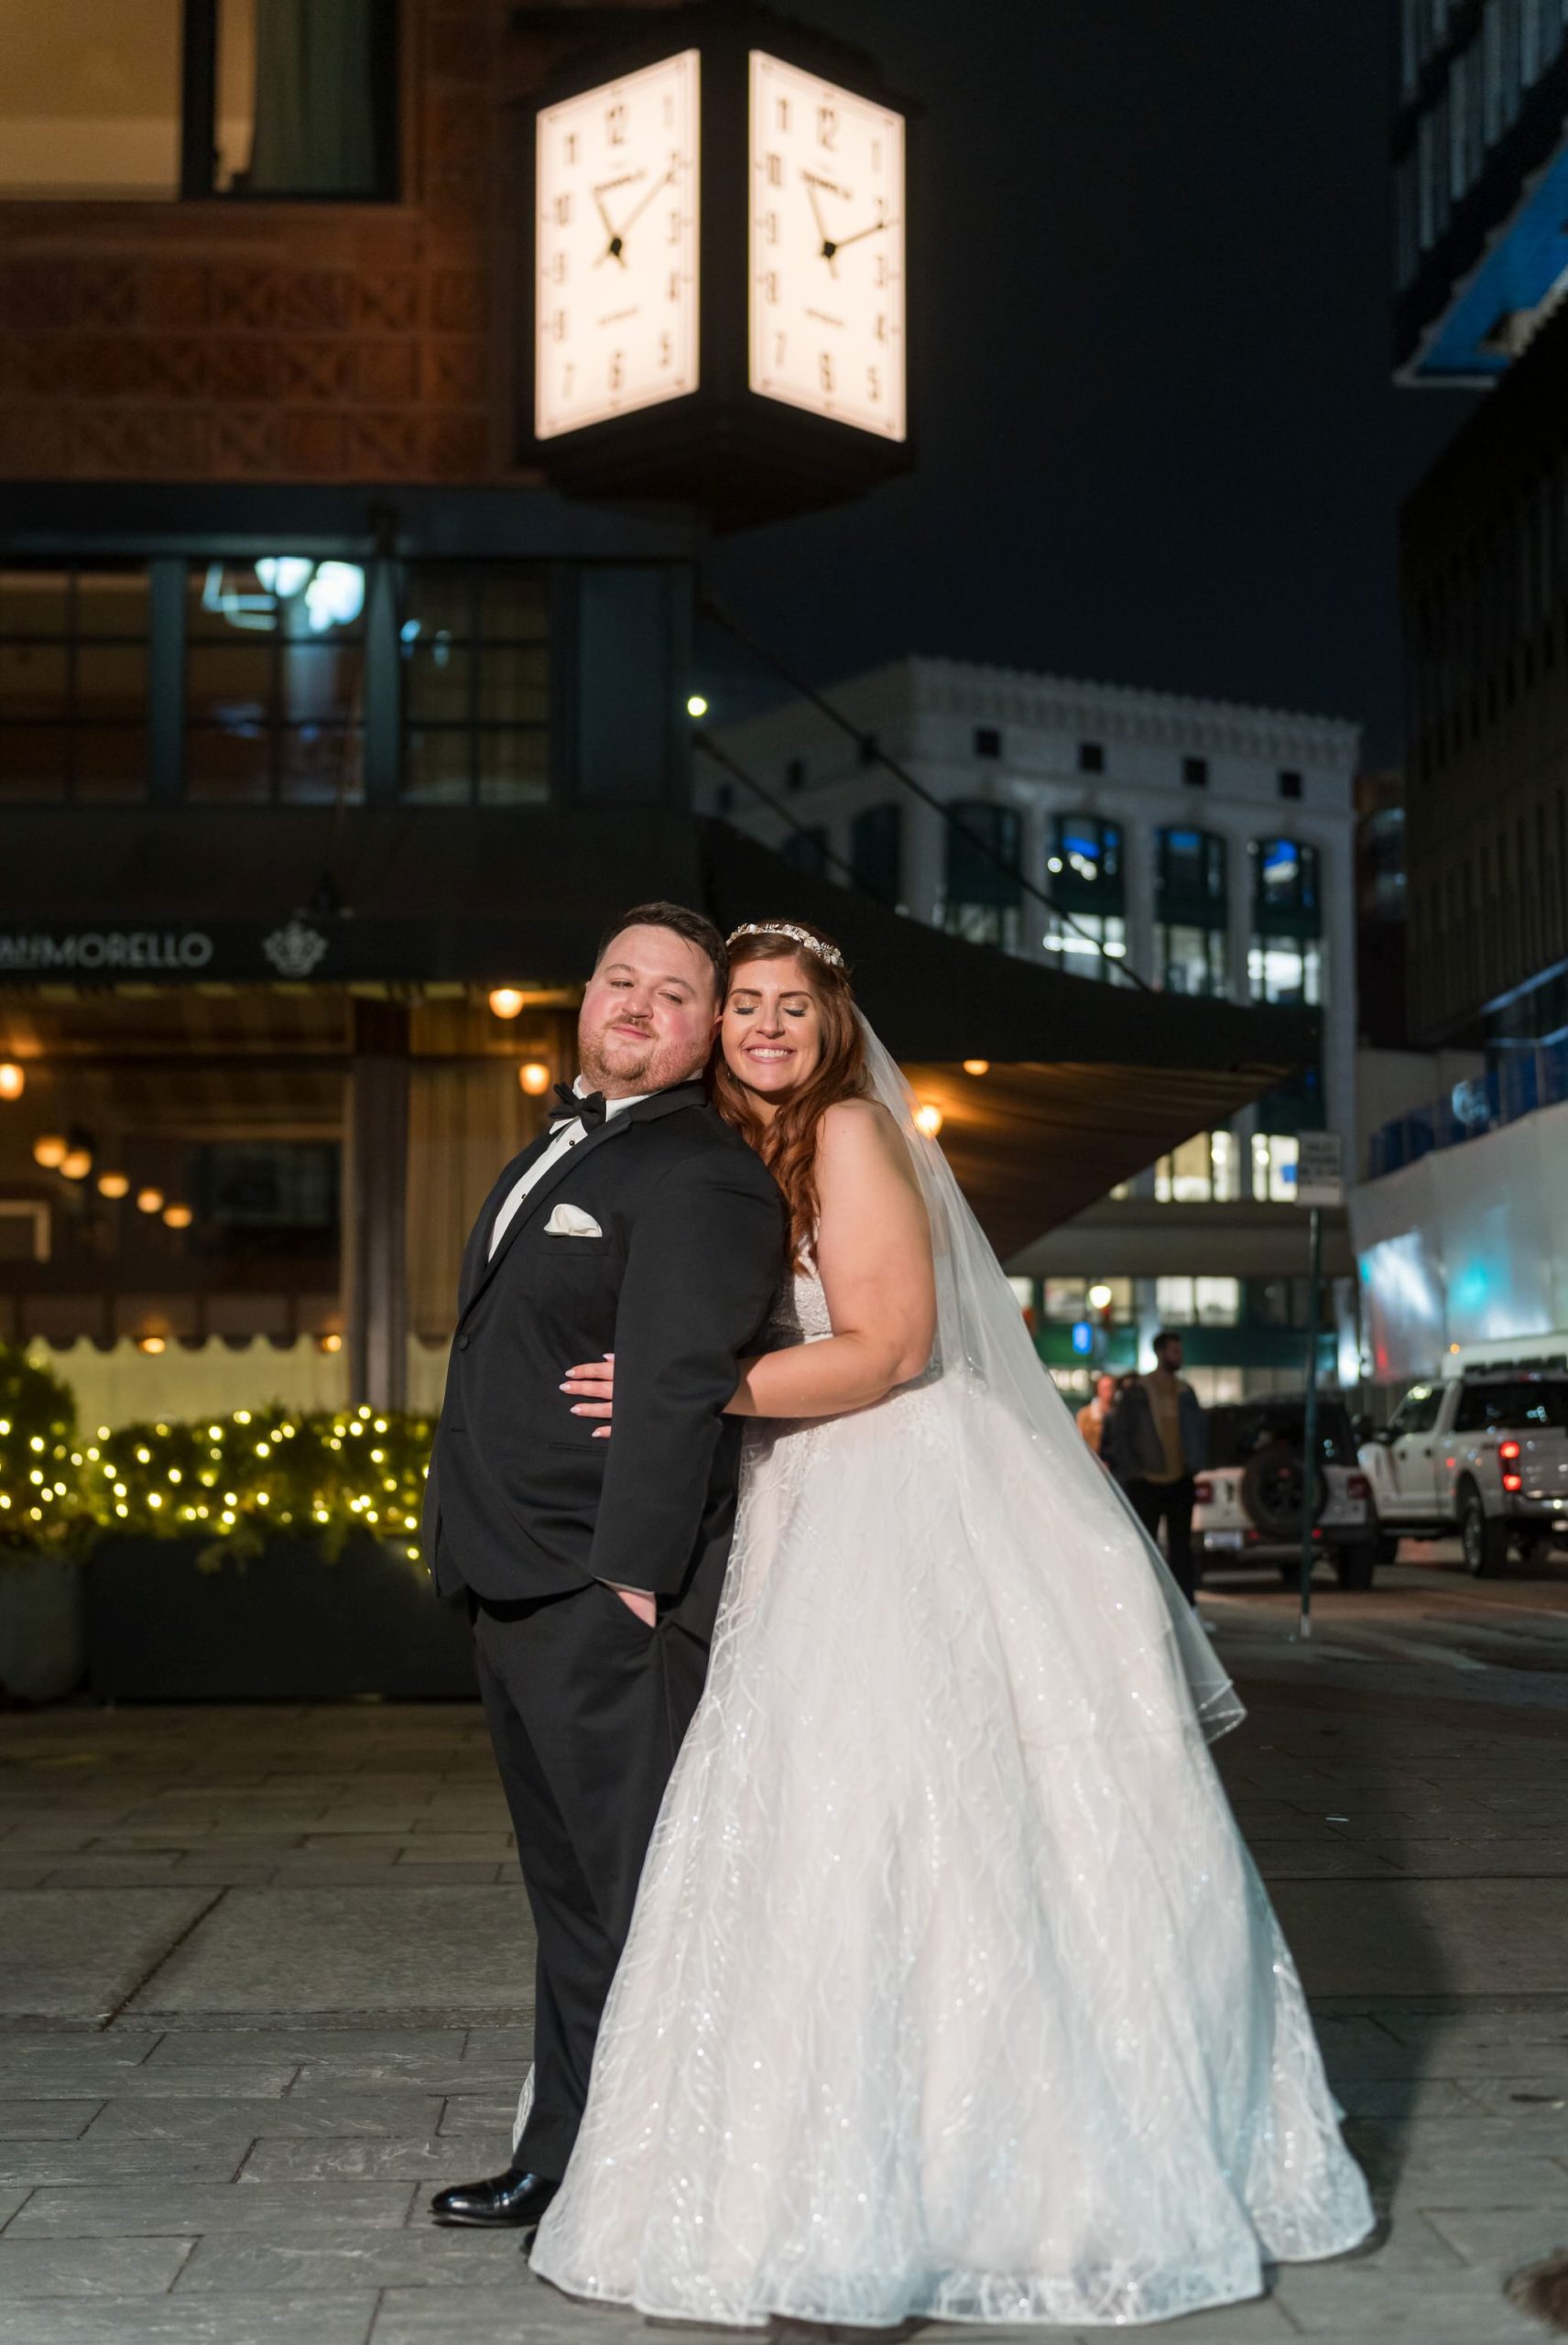 A bride and groom pose in front of San Morello on Woodward in Detroit.